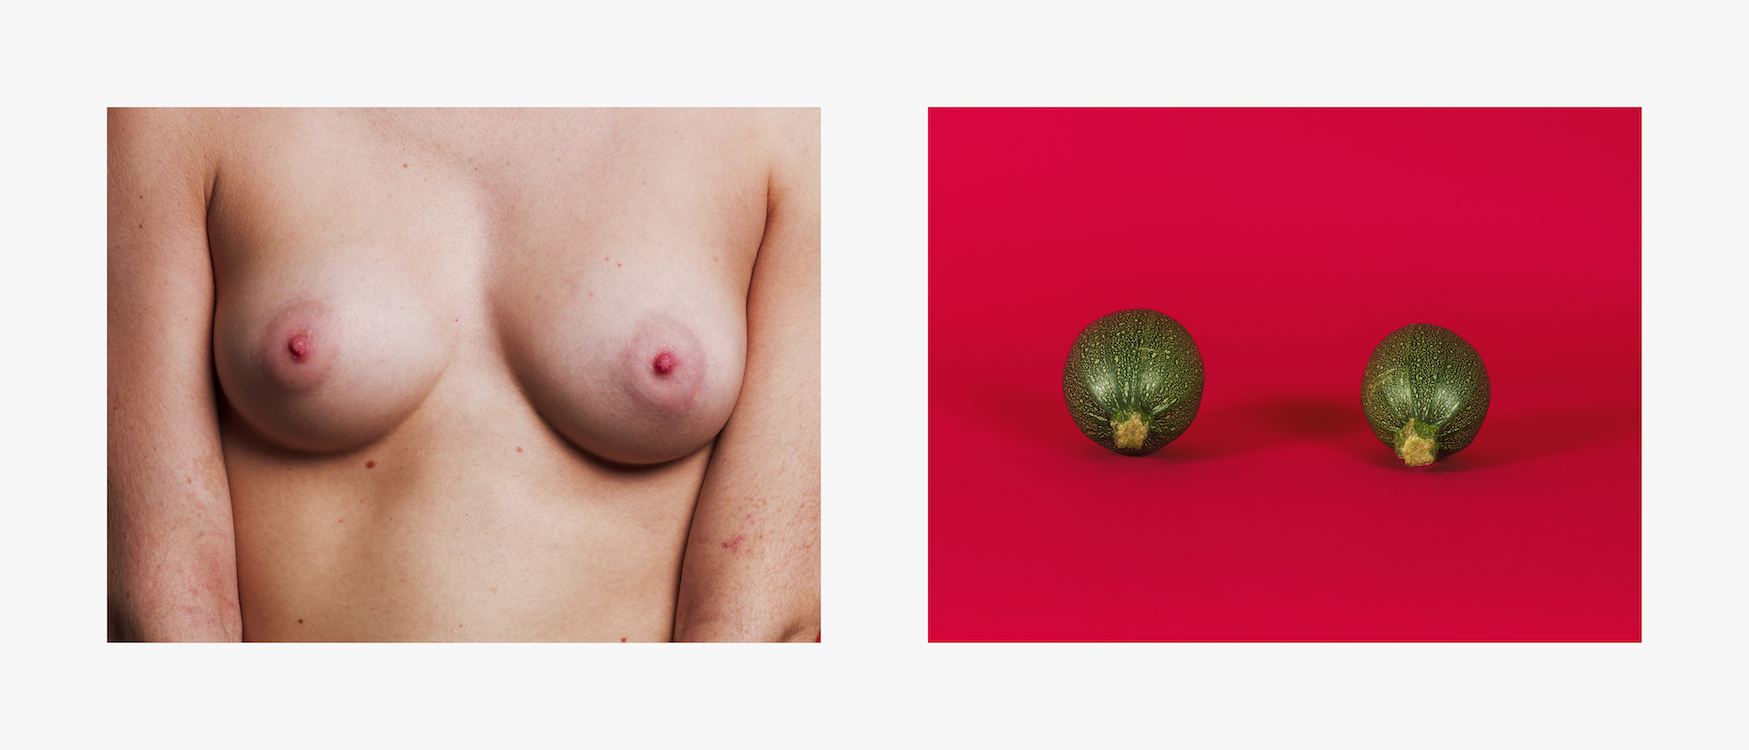 08-boobs-personal-work-charlotte-abramow-photography-paris-brussels